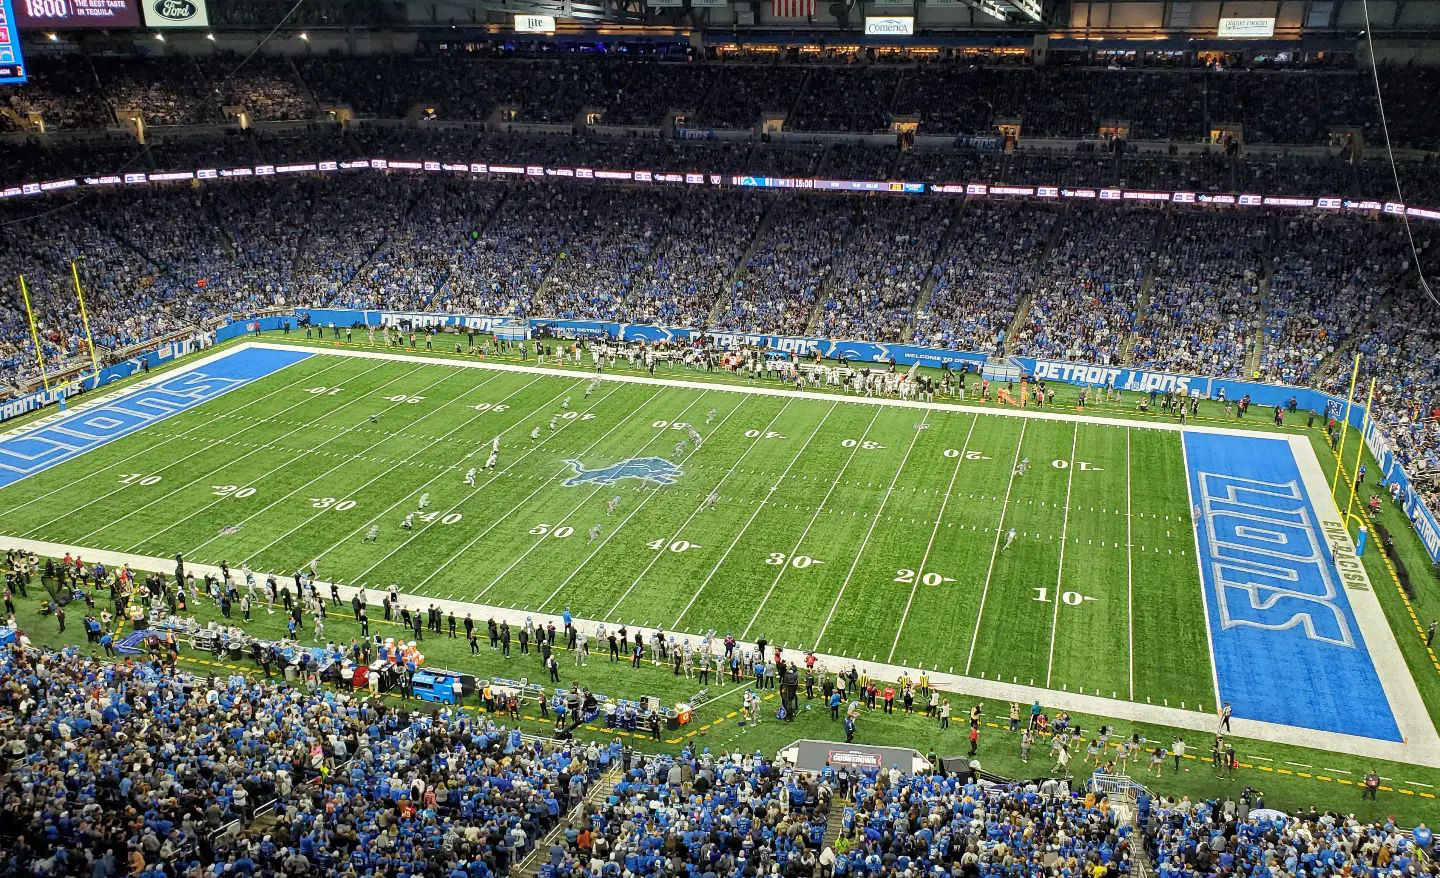 Ford Field during a Detroit Lions football game